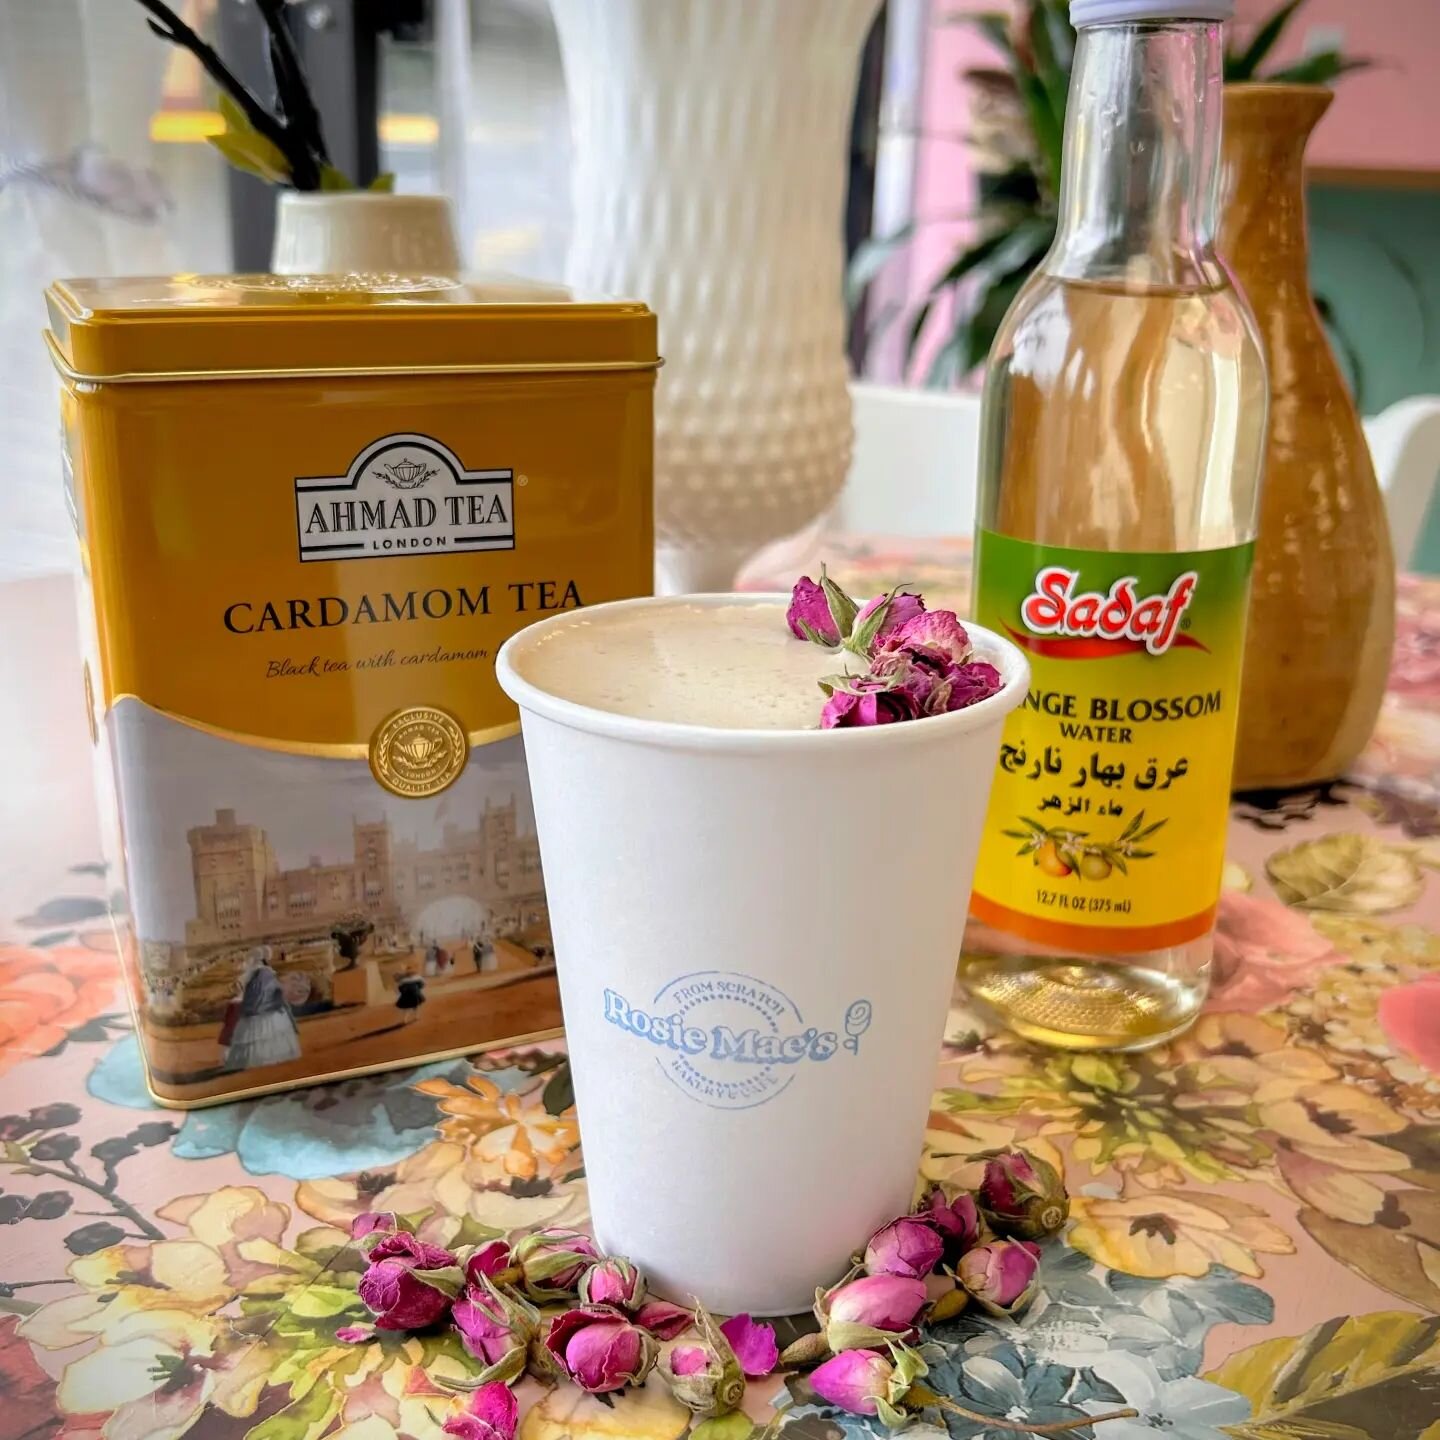 We have many seasonal treats coming up in the pastry case this week to celebrate Spring and Easter.

To celebrate Persian New Year, we would like to introduce our Persian Tea Latte! Rich cardamom black tea latte lightly sweetened with our homemade ro